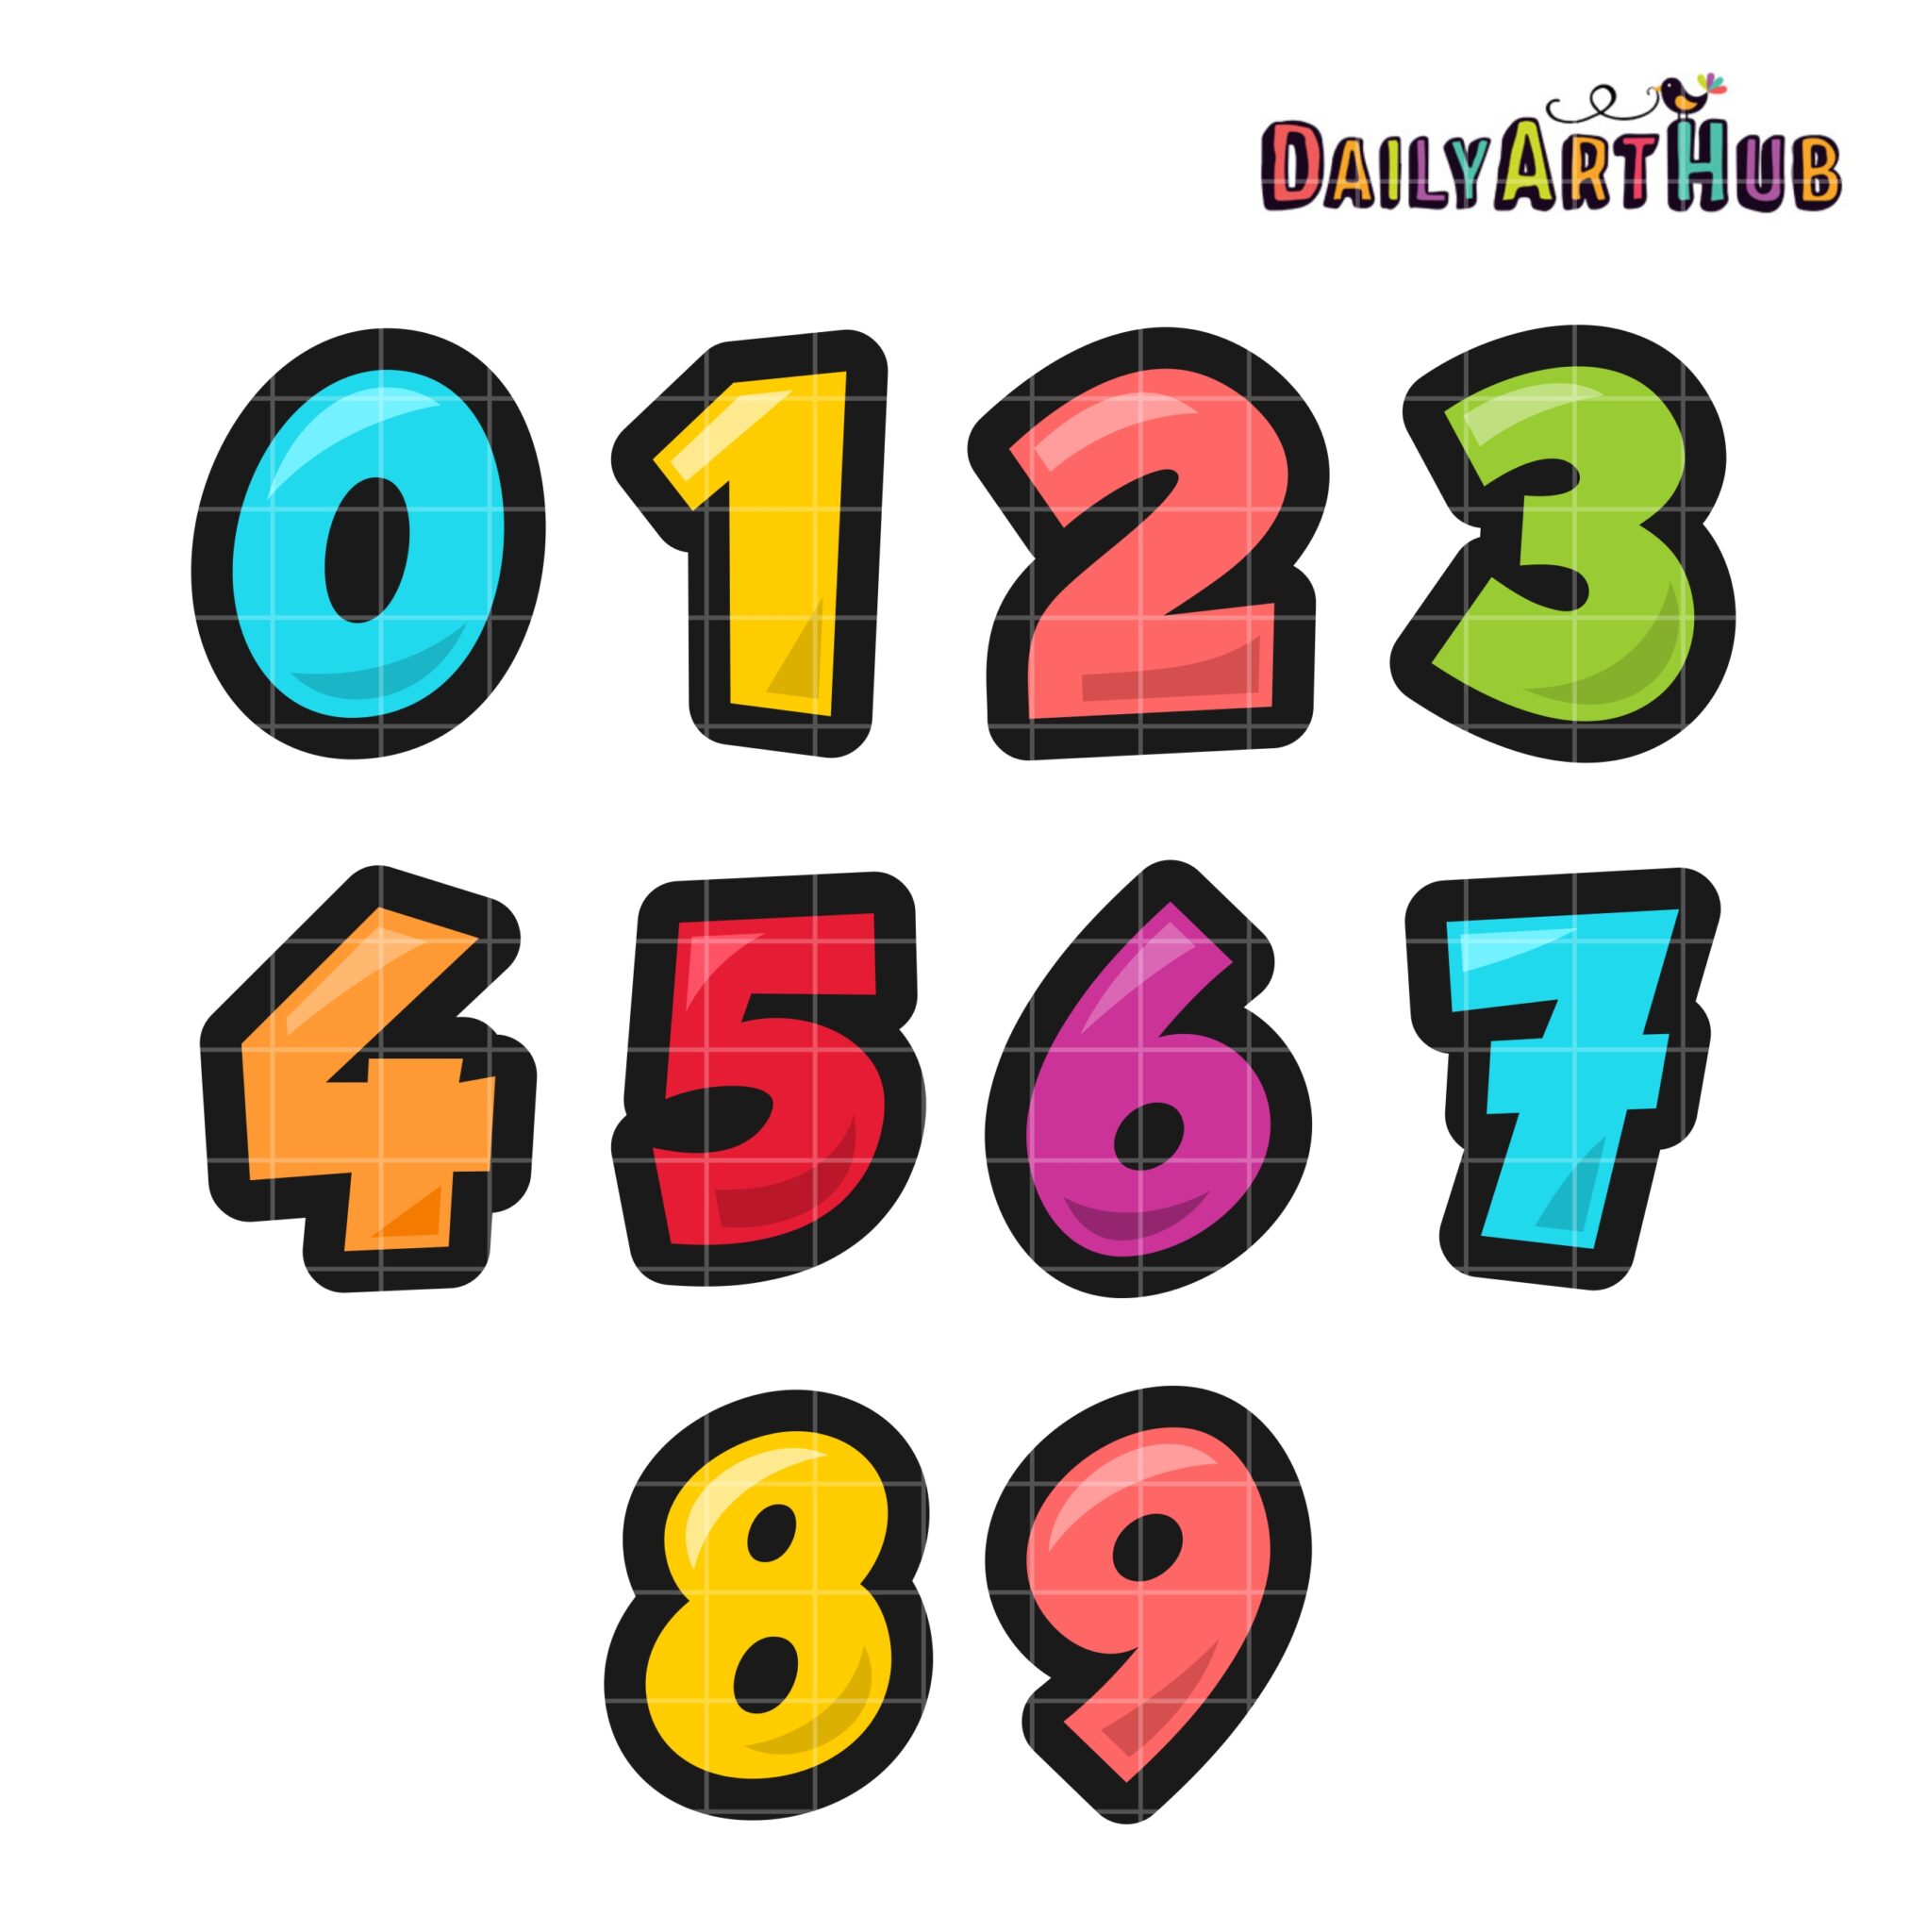 https://www.dailyarthub.com/wp-content/uploads/2016/05/Colorful-Numbers-scaled.jpg